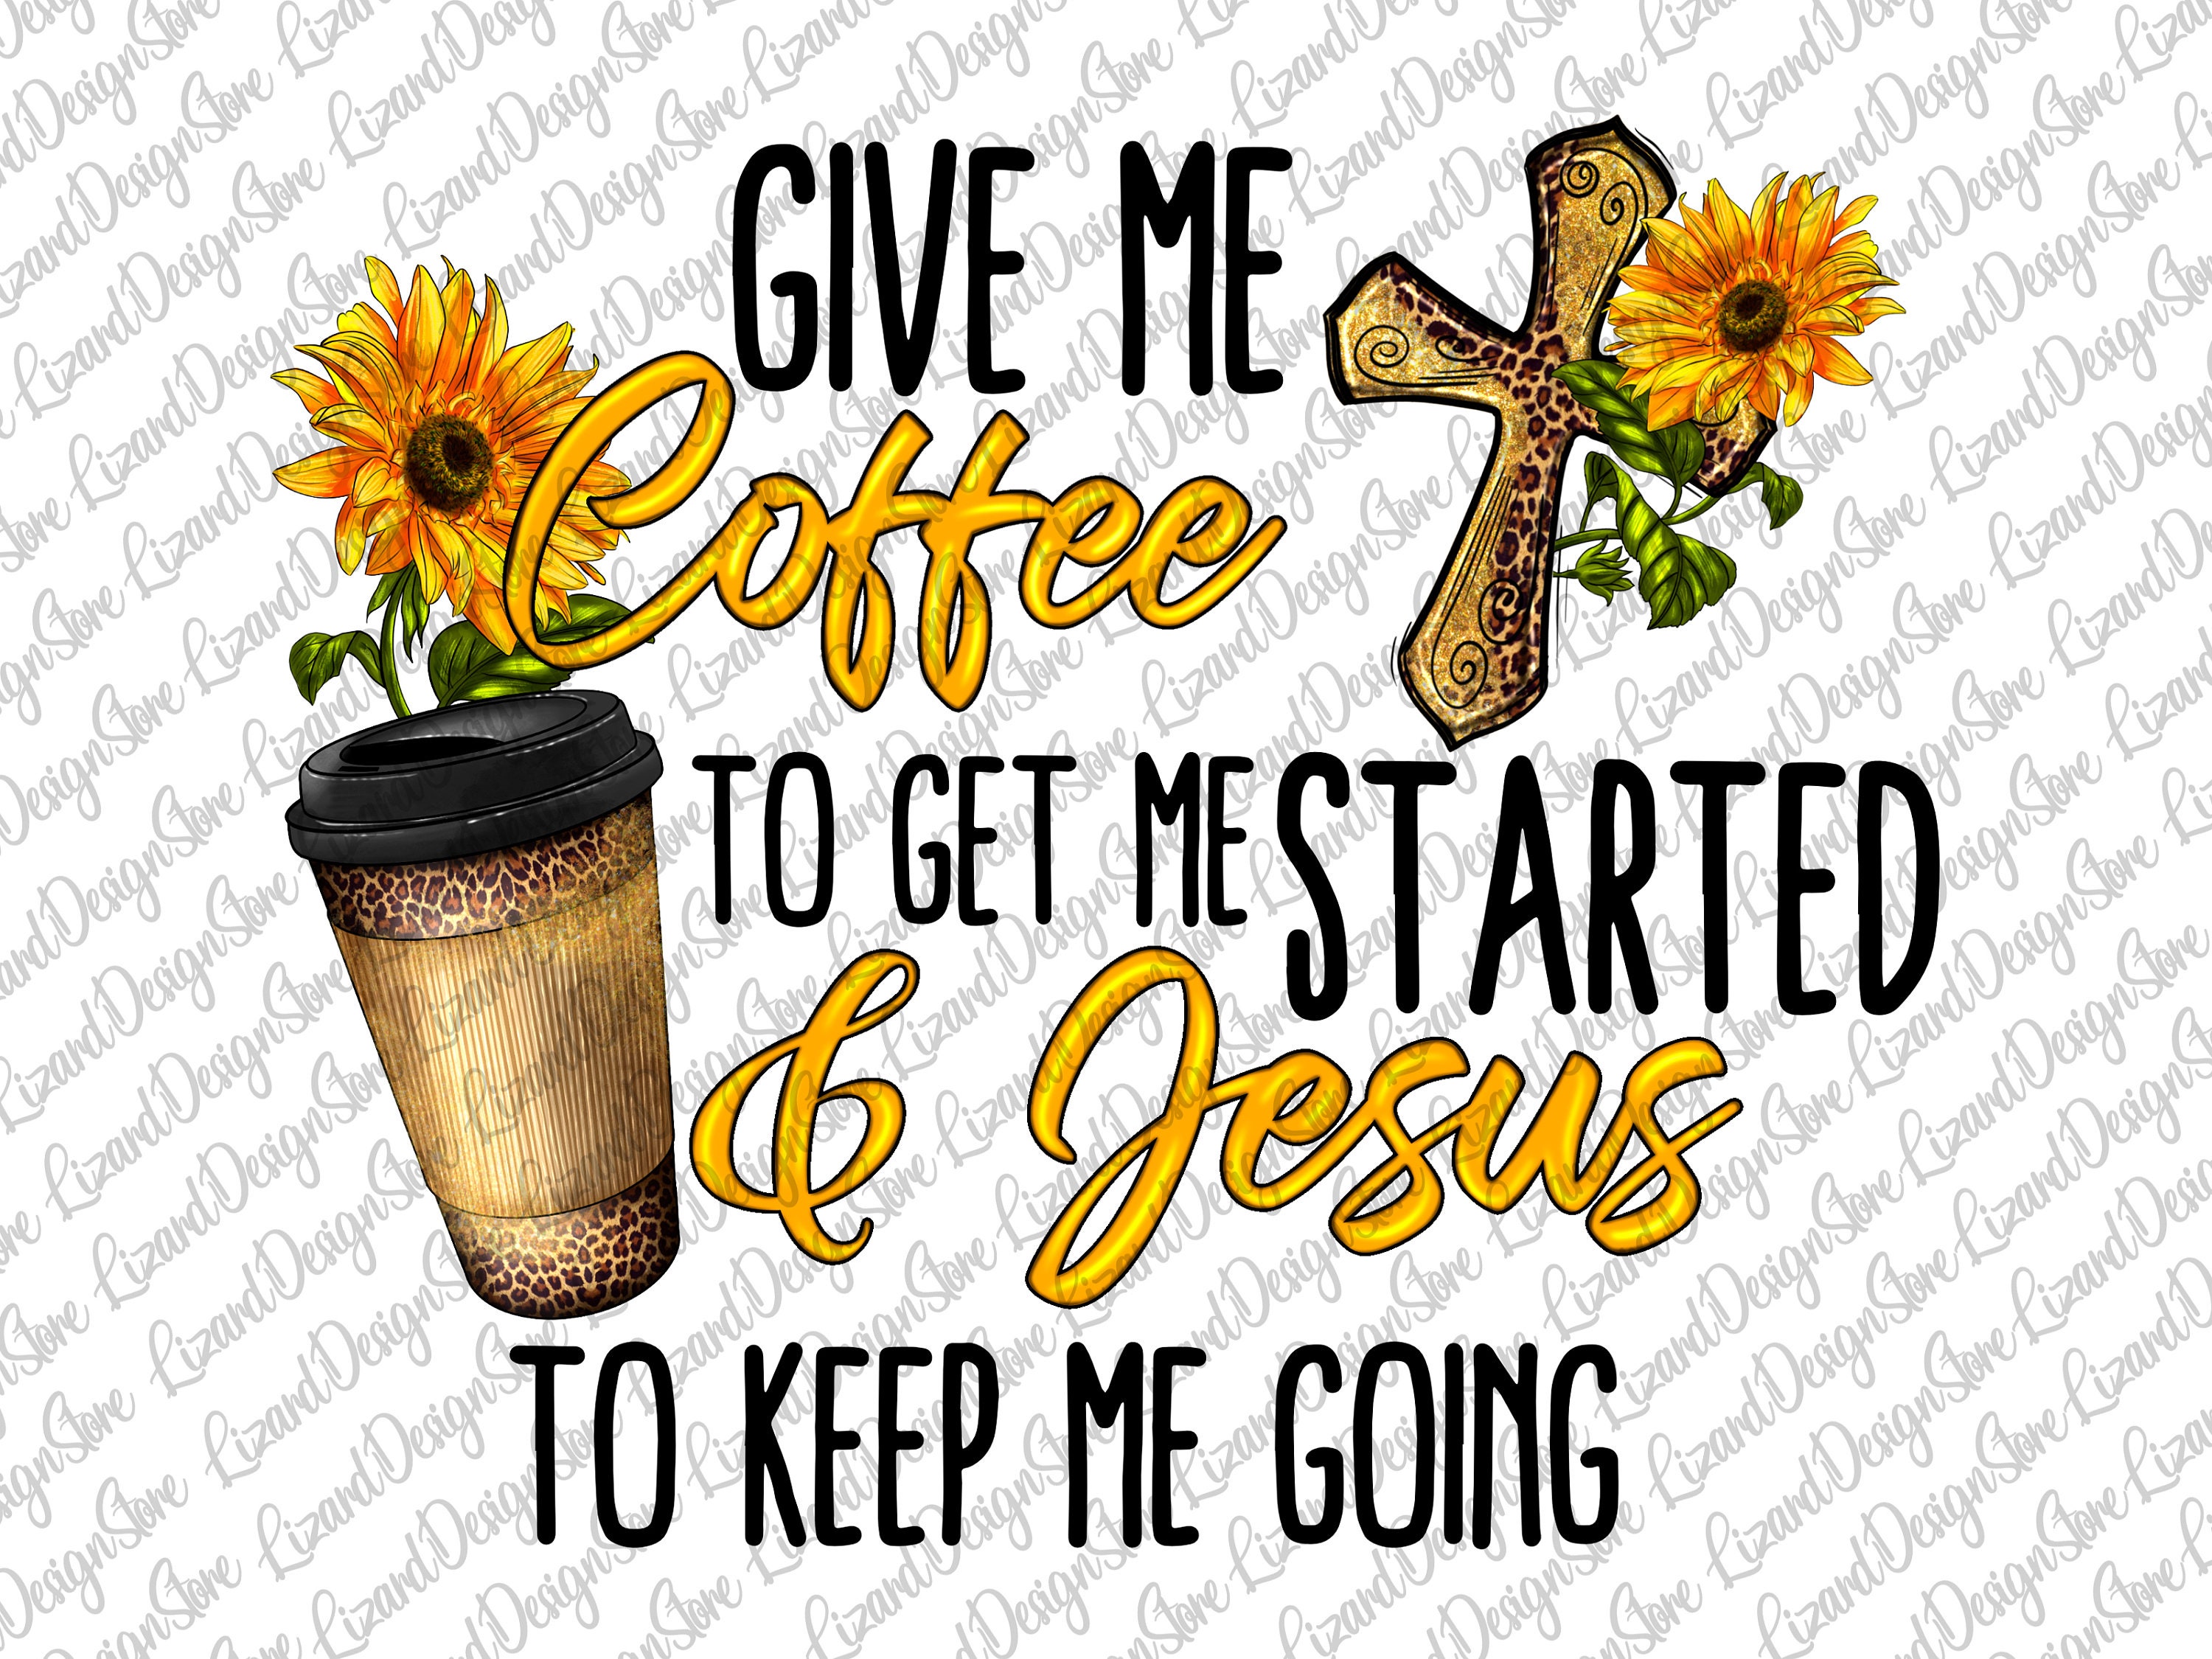 Coffee Gets Started Jesus Keep Going Christian Stickers For Your Car And  Truck, Custom Made In the USA